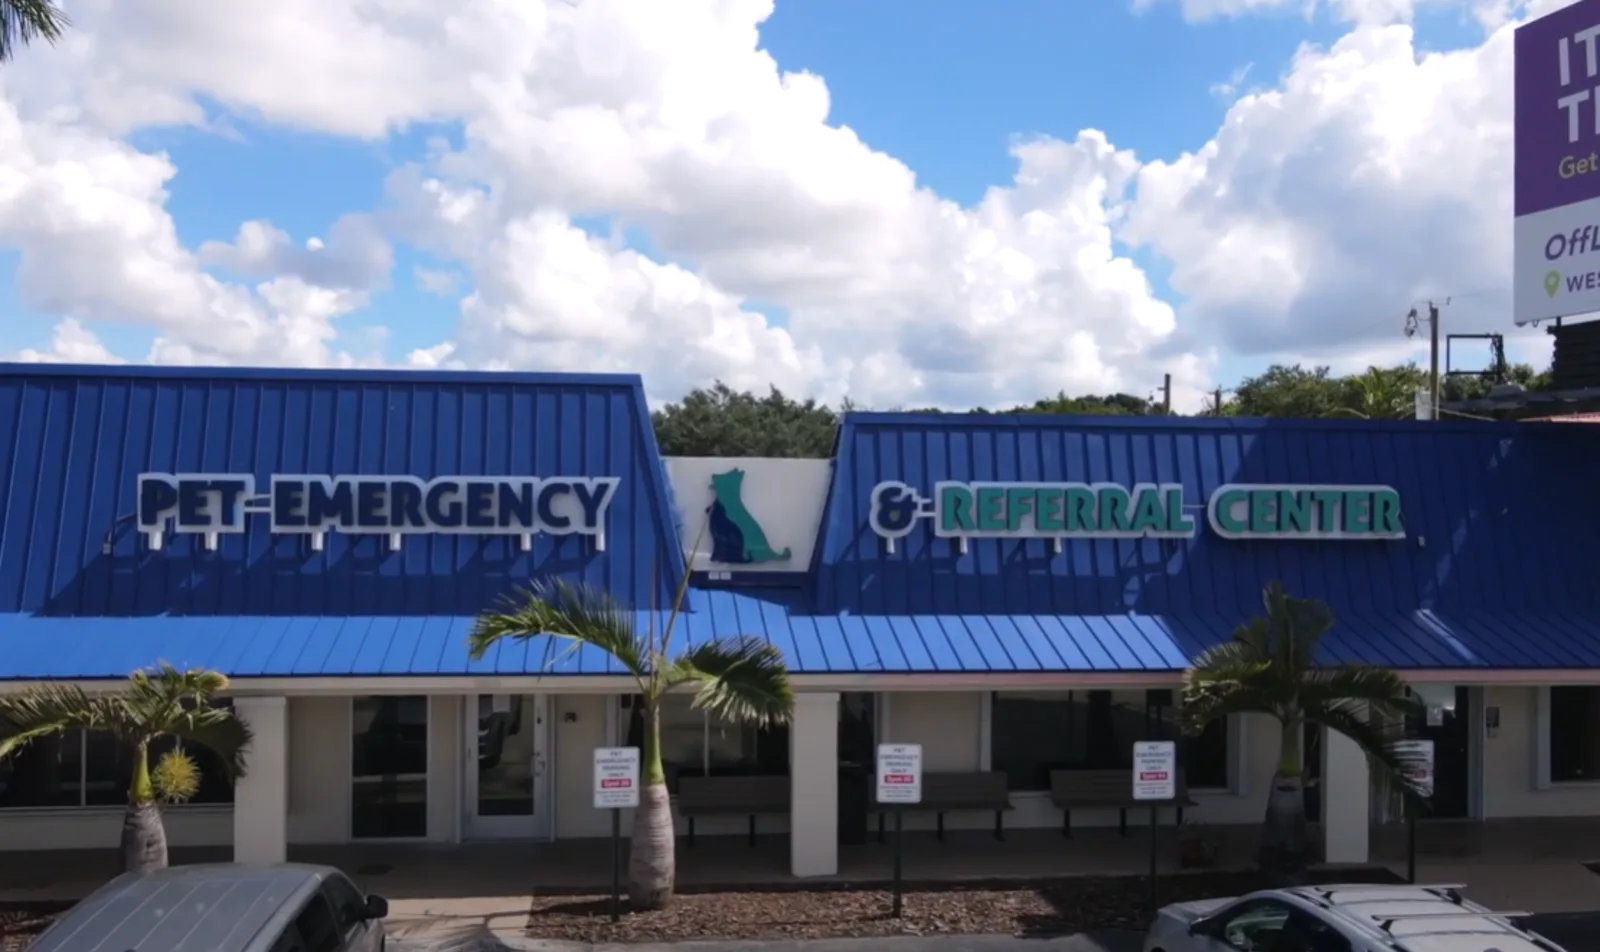 PERC - Emergency & Critical Care video image of the parking lot view of Pet Emergency & Referral Center